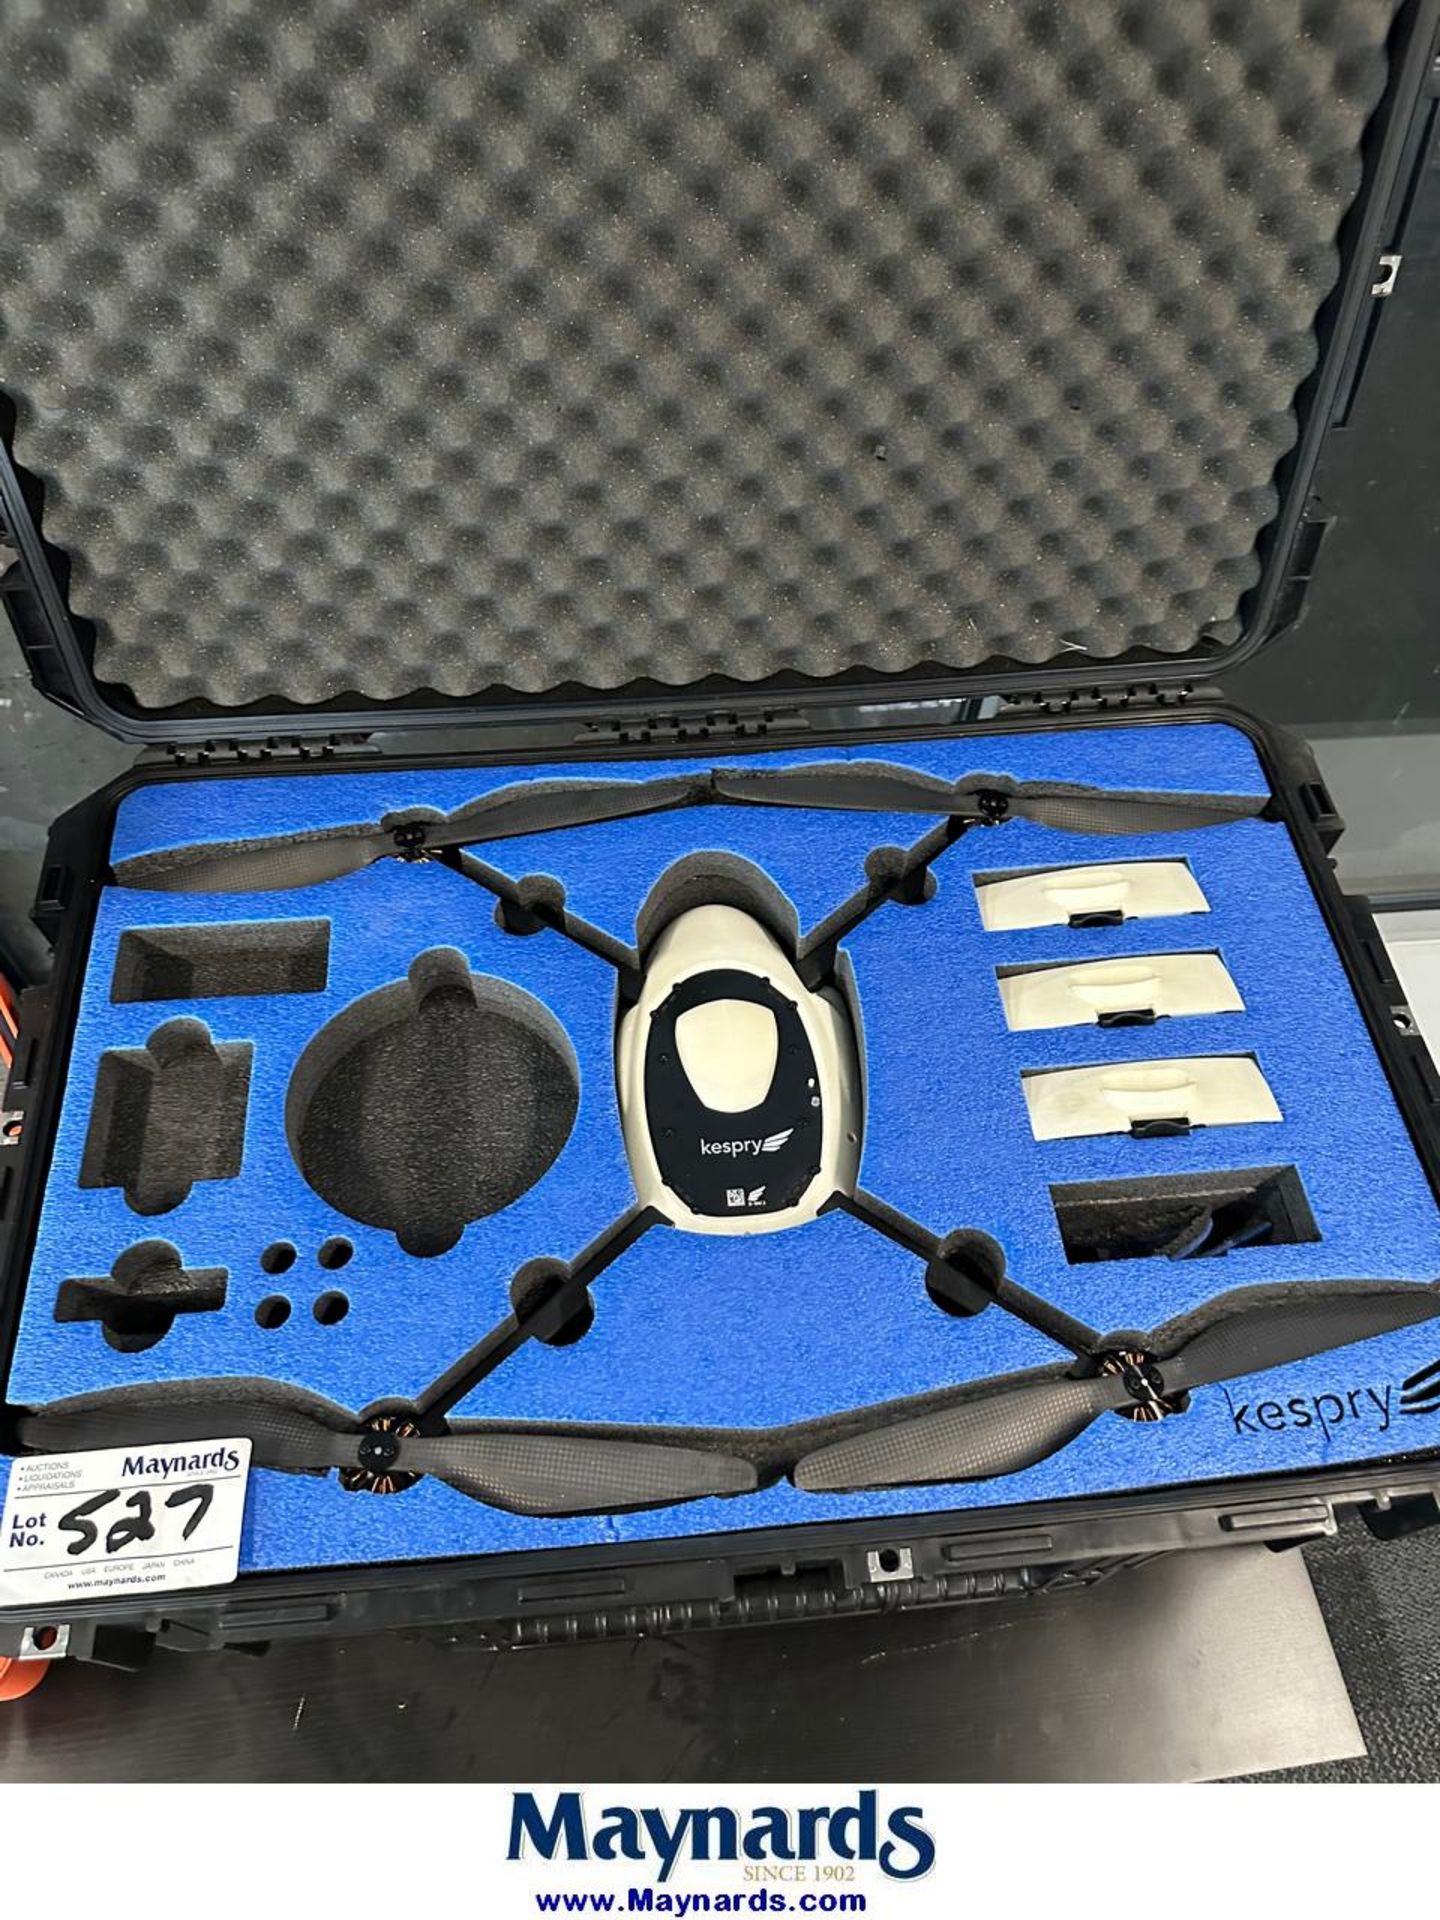 Kespry D84C3 drone - Image 3 of 3